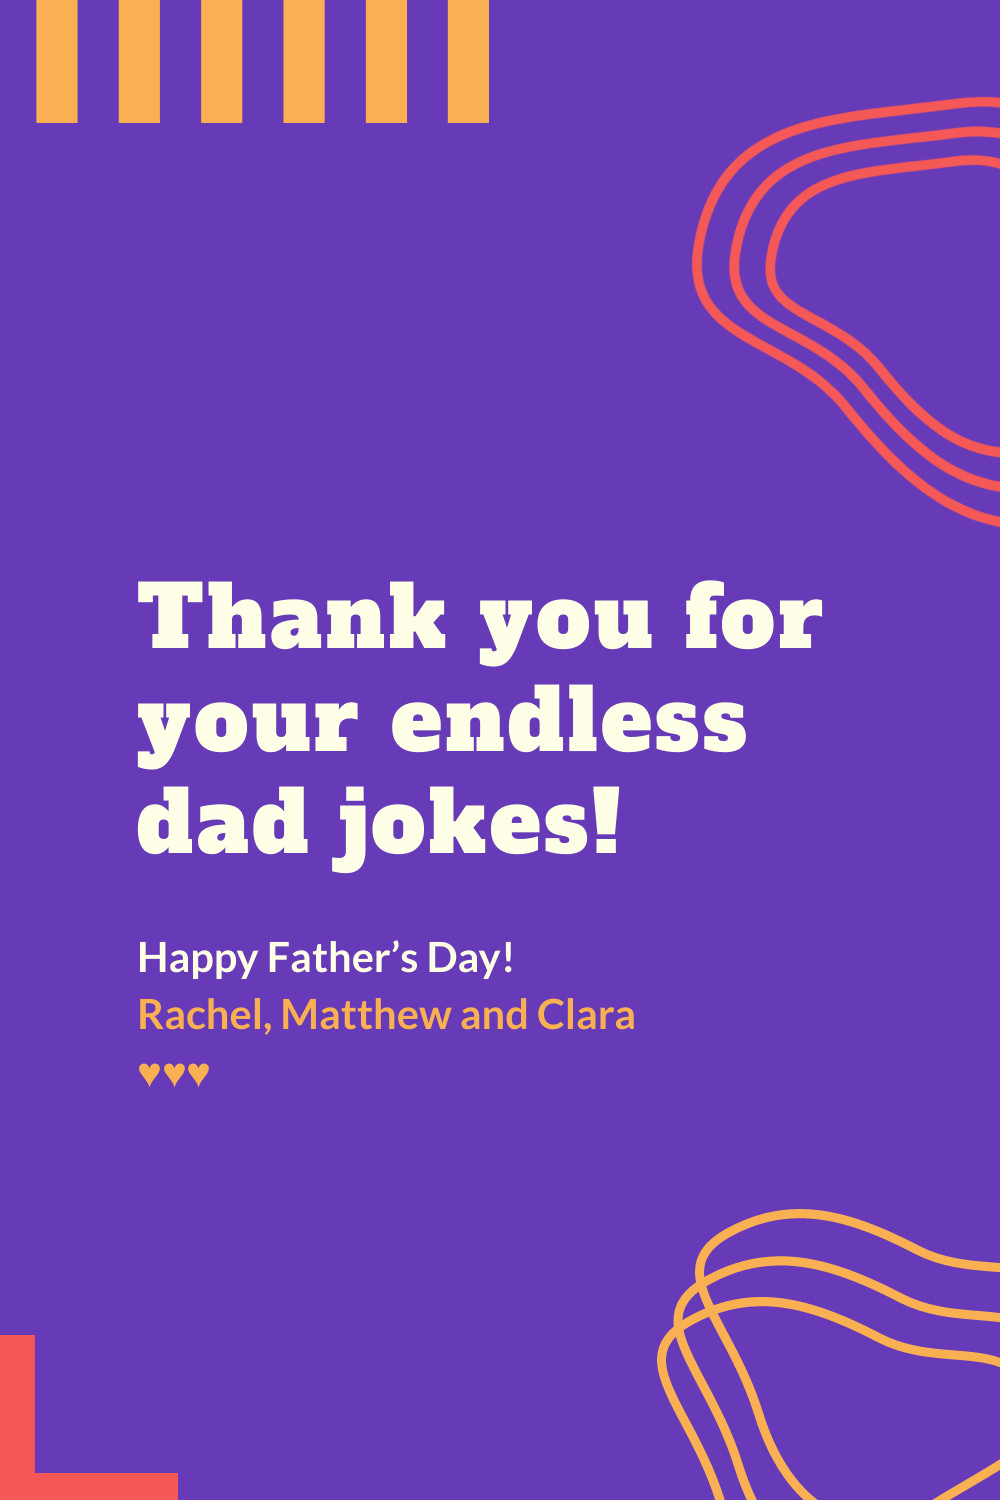 Thank You Father's Day Jokes Facebook Cover 820x360